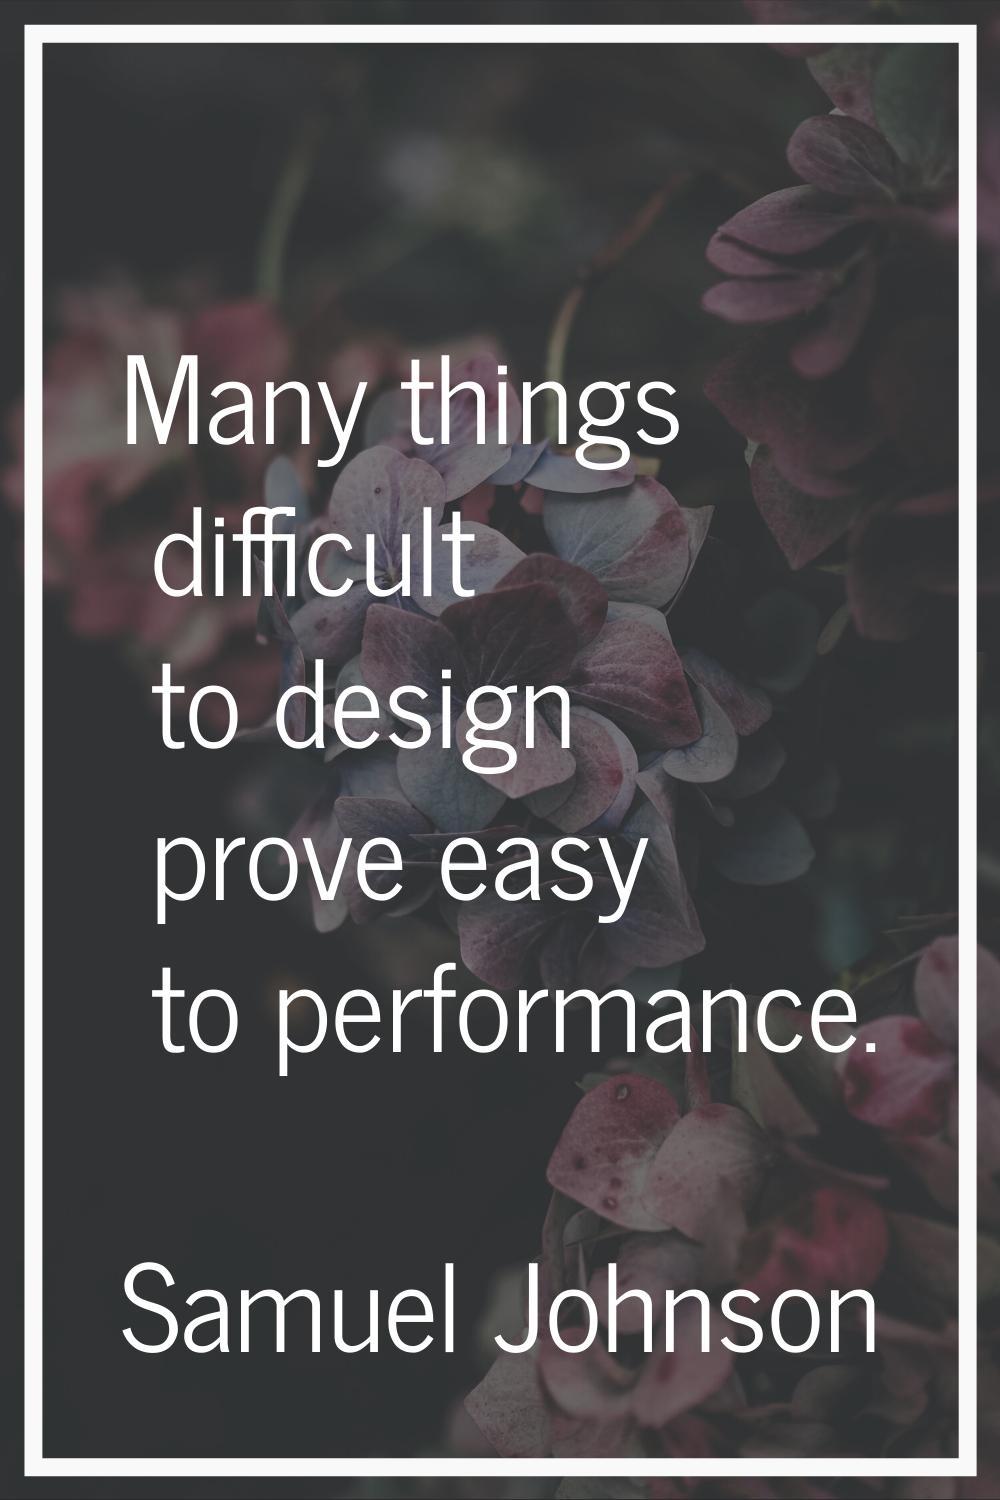 Many things difficult to design prove easy to performance.